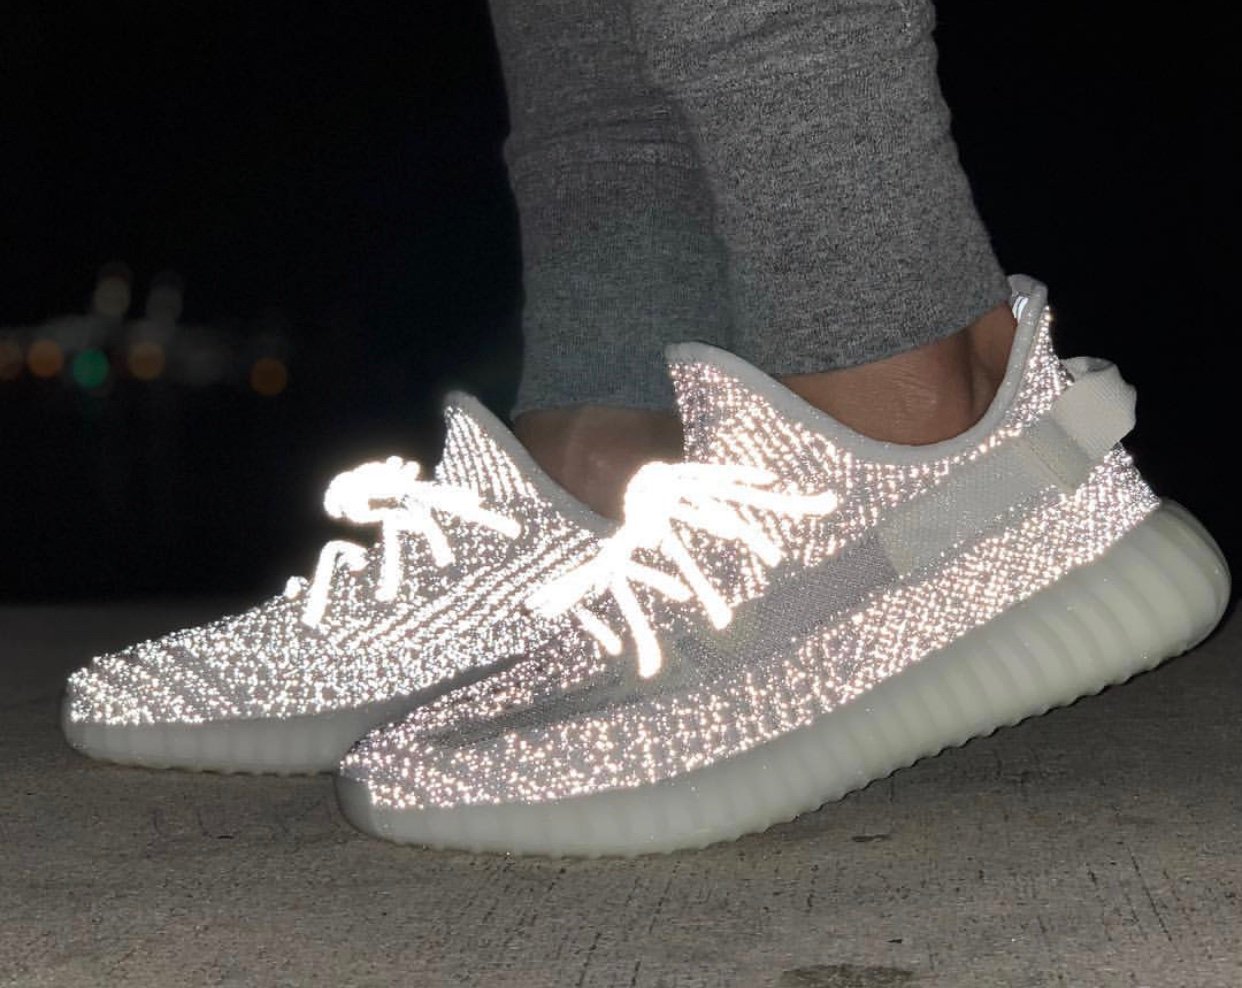 adidas x yeezy boost 350 v2 static sneakers